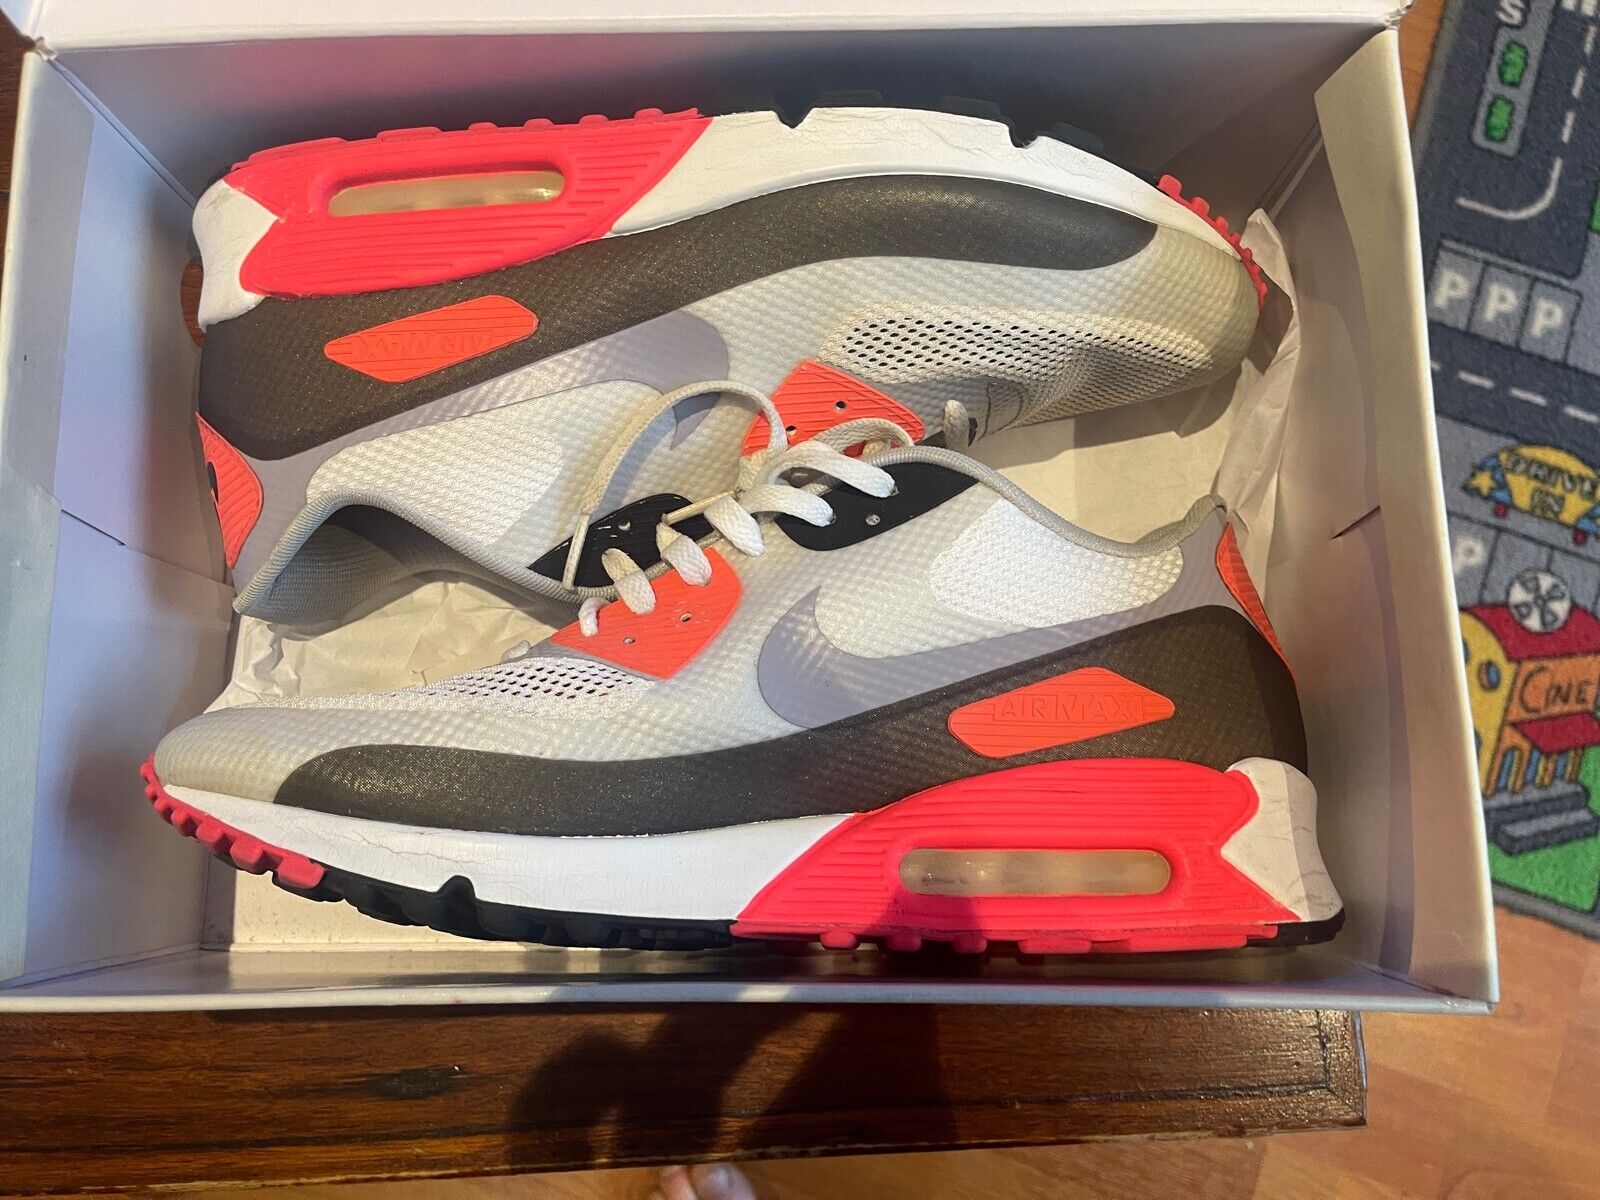 Genuine Authentic Rare Nike Air Max 90 Hyperfuse Independence Day Size UK 11